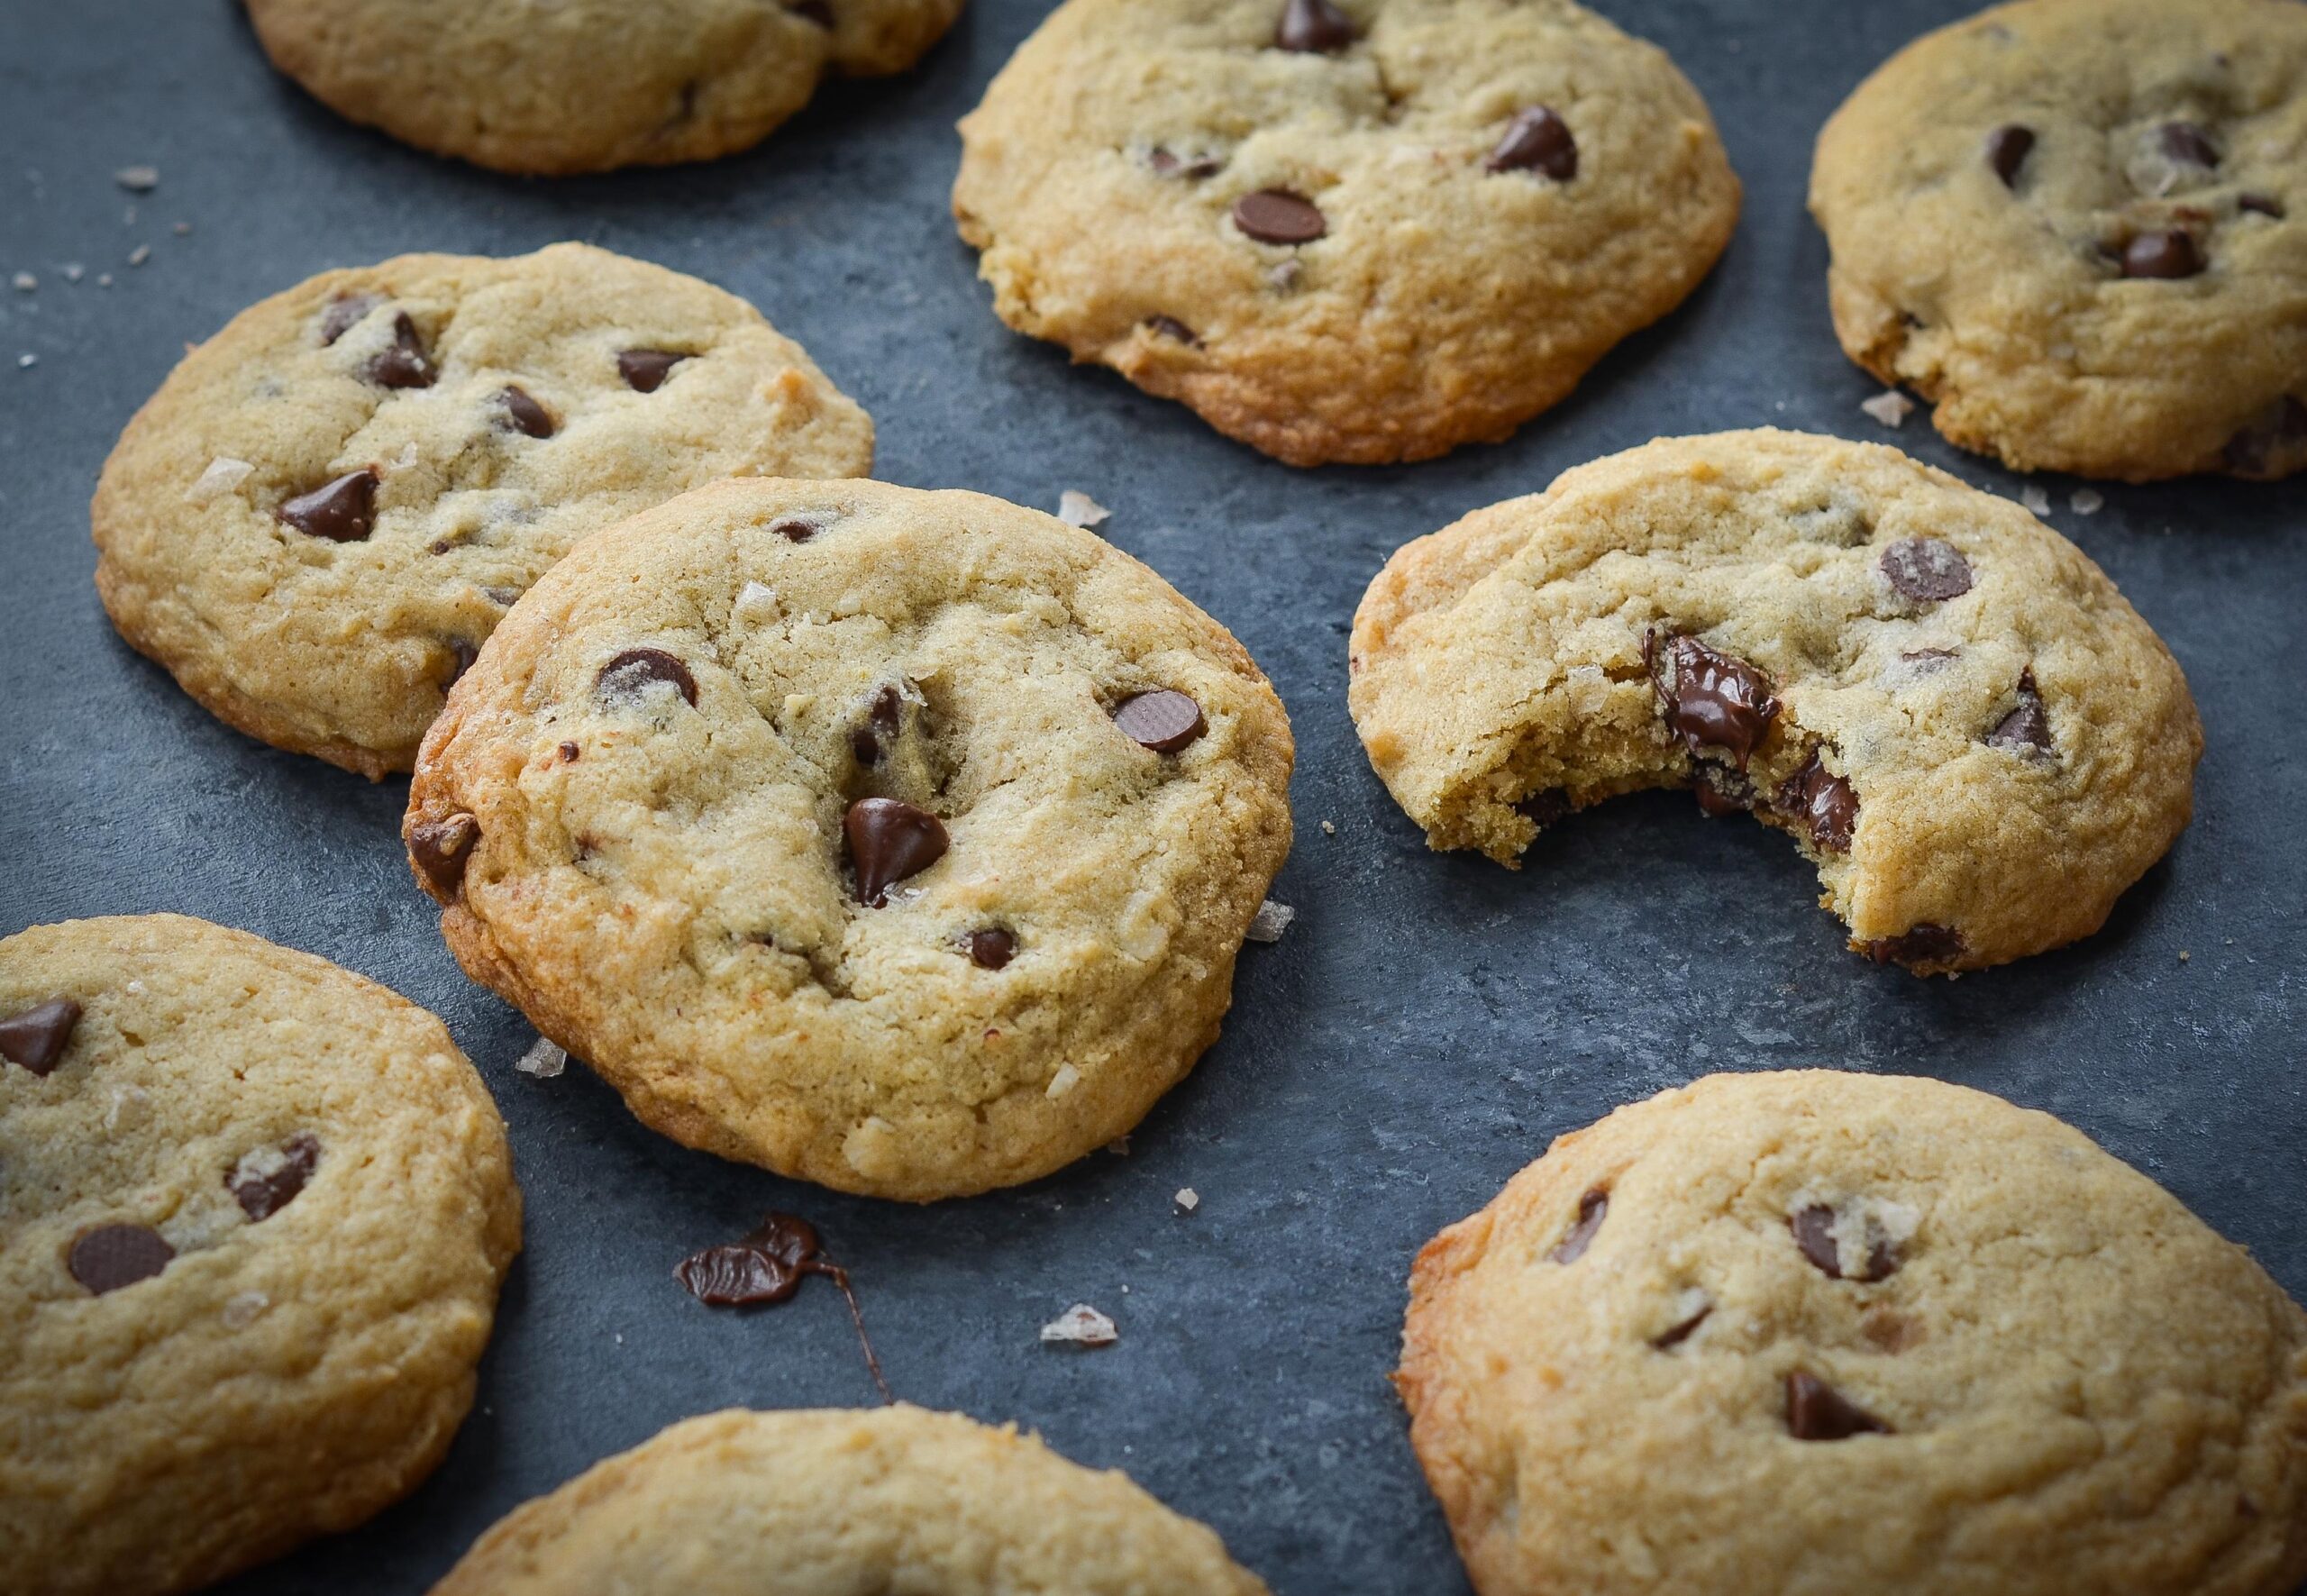 • Watch out, these chocolate chip cookies are so delicious, they might disappear before your eyes!